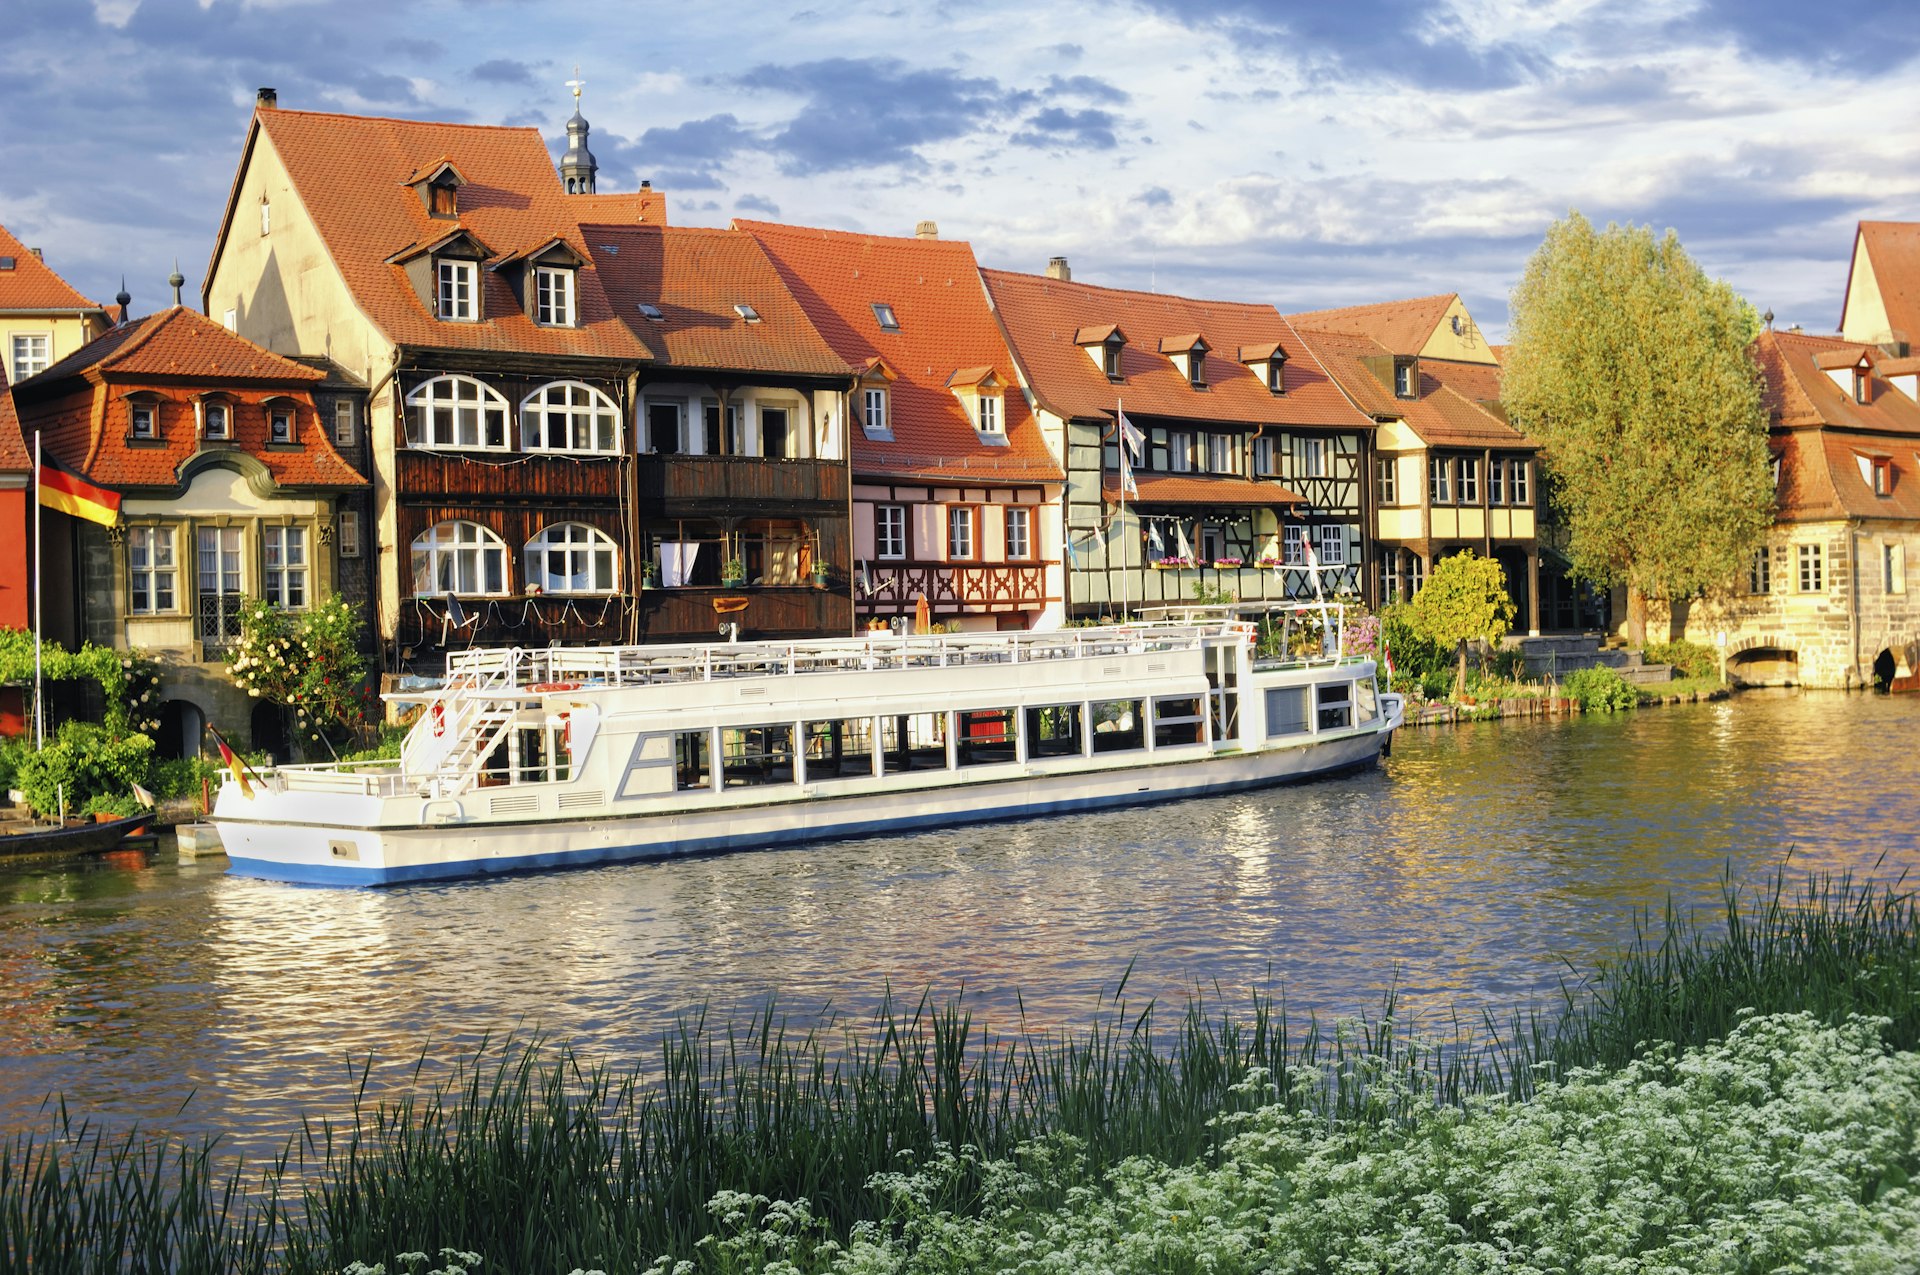 A sightseeing boat in front of old fishermen houses in the UNESCO world heritage site of Klein Venedig (Little Venice) in Bamberg, Germany